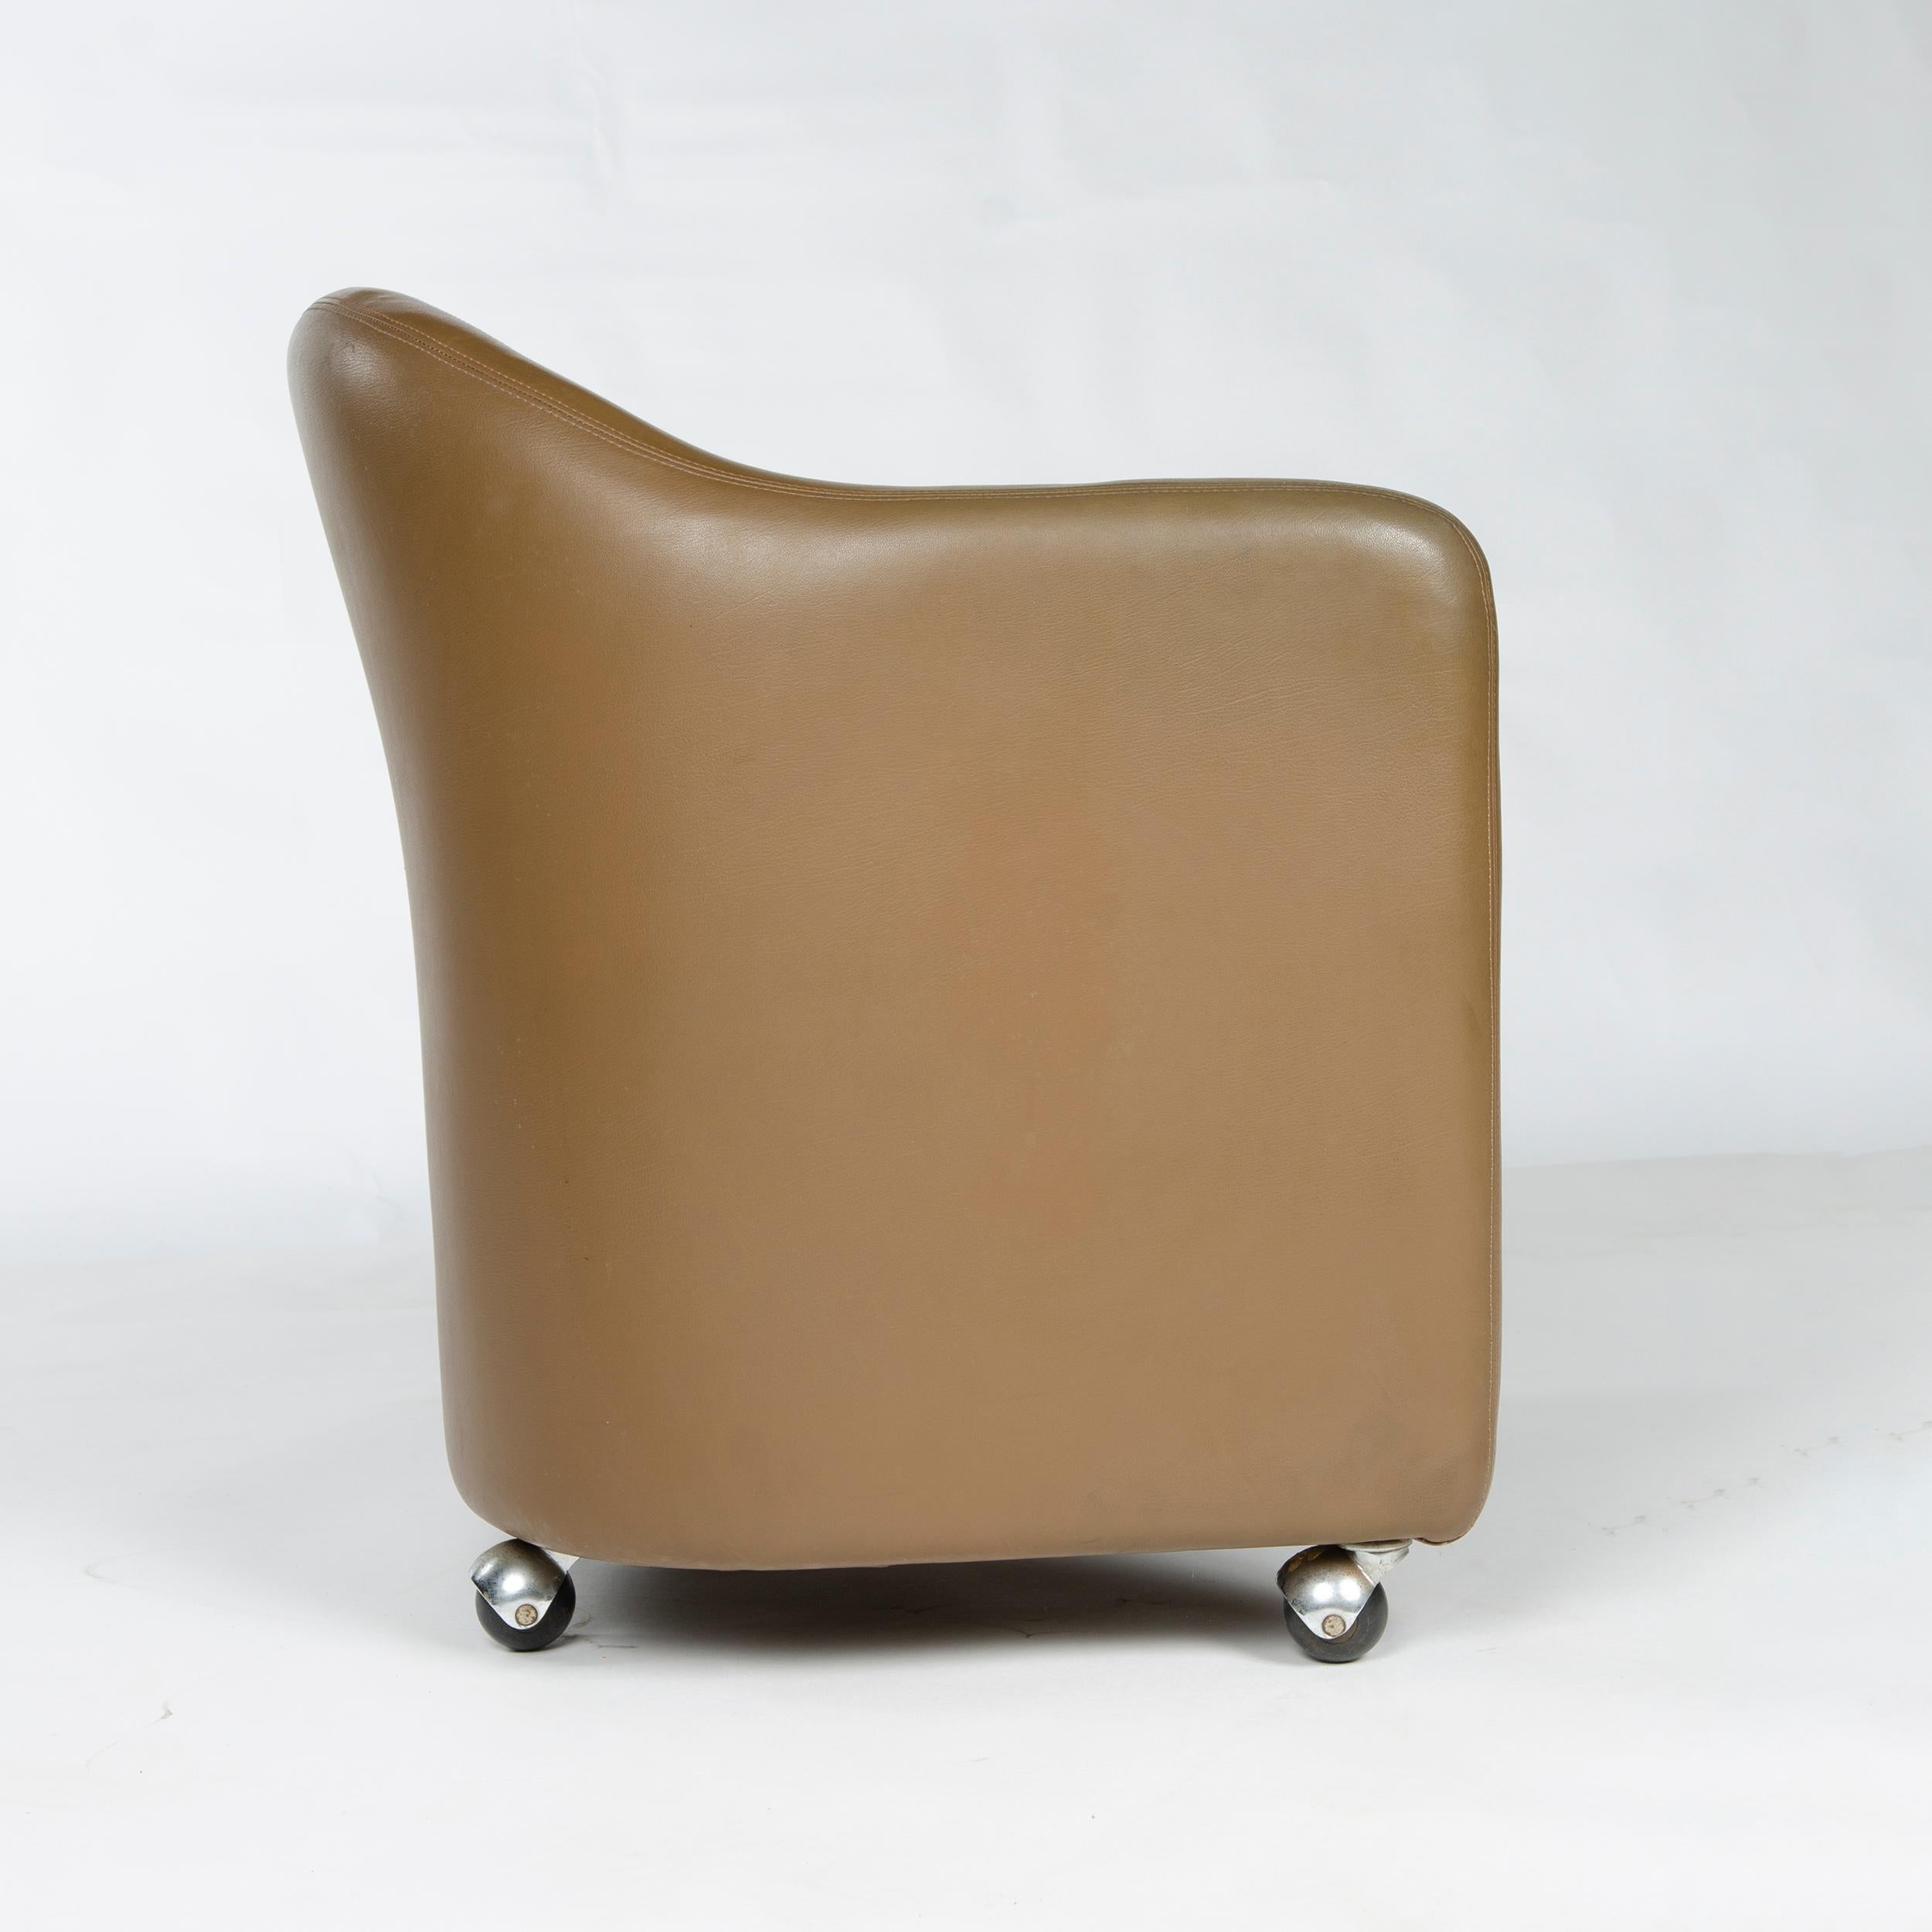 1970s Italian Barrel-Back Desk or Cocktail Chair by Eugenio Gerli for Tecno For Sale 1